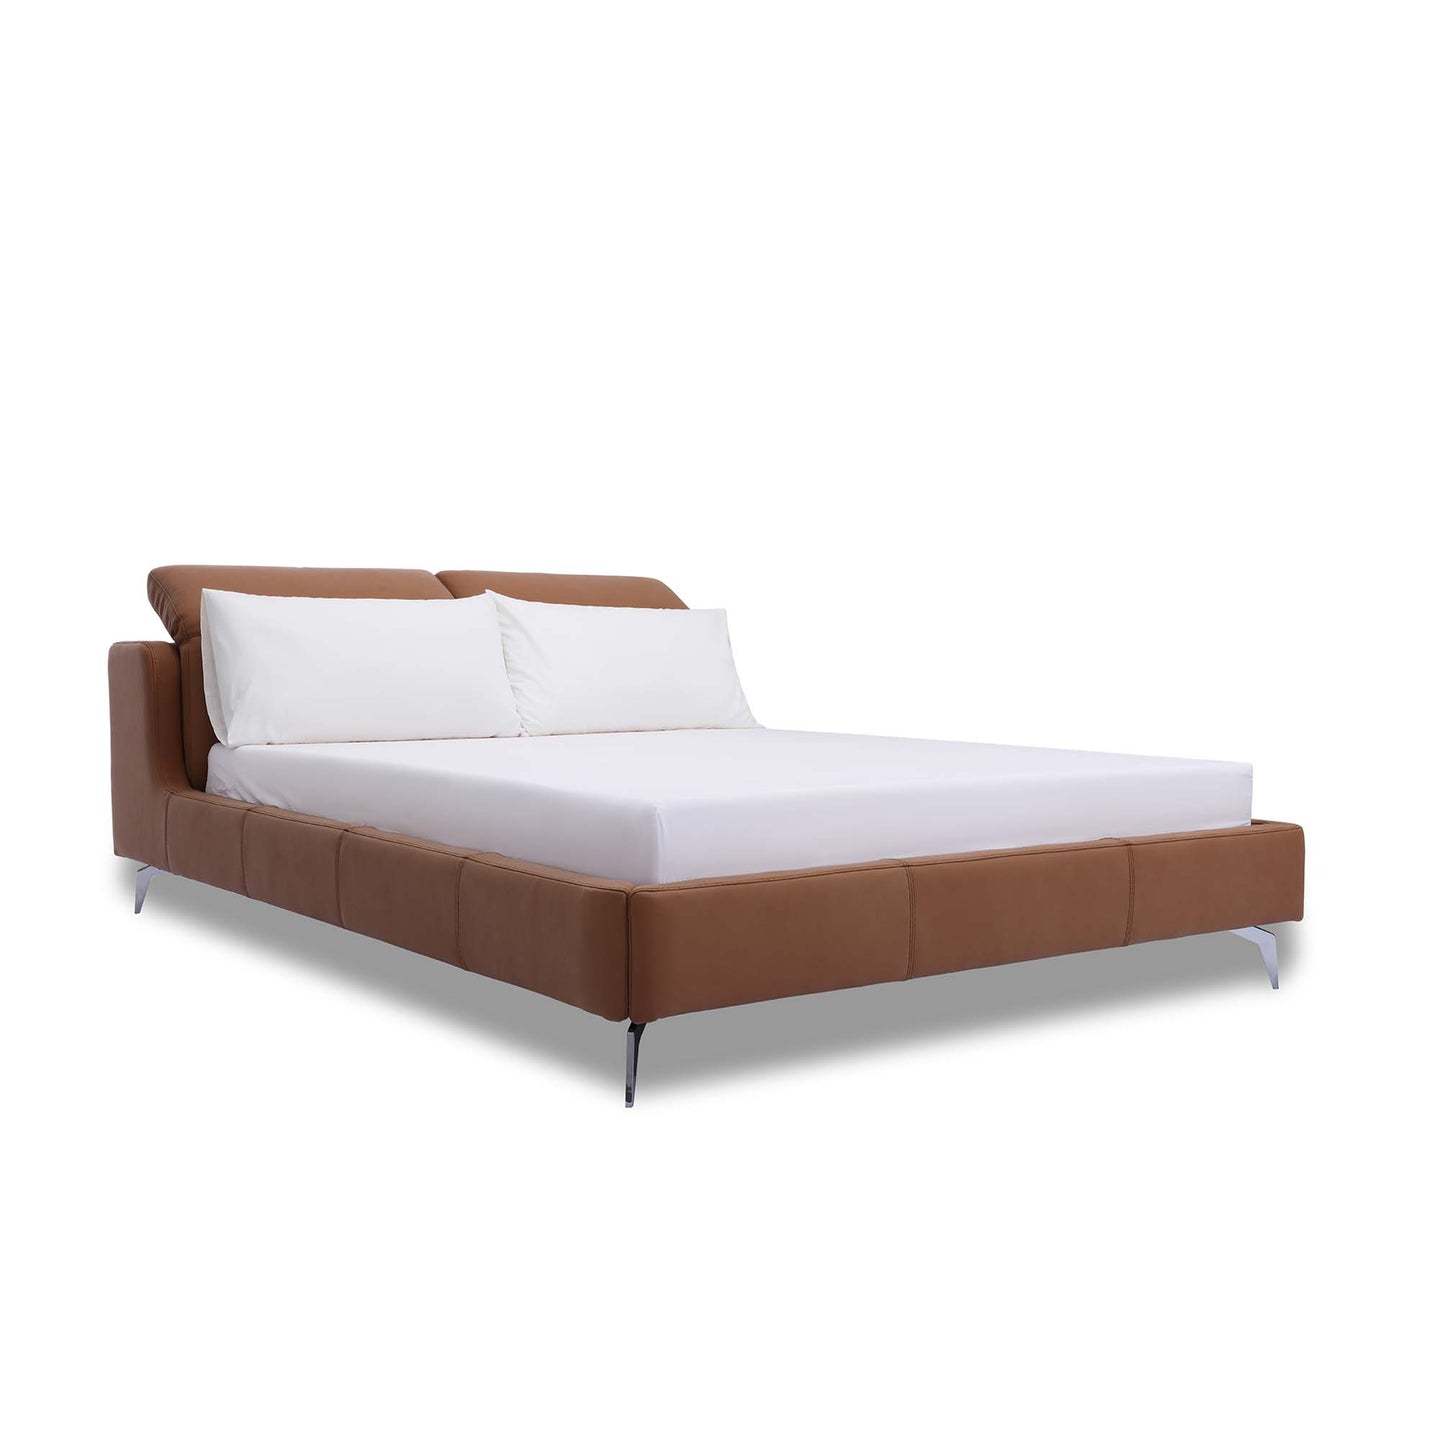 The Cleo bed frame is especially suitable for those who favor a peaceful pre-bedtime reading session. It features an adjustable neck rest, providing ideal posture support with no need for extra pillows. In addition, its headboard conveniently conceals storage space to maximize your room's capacity.